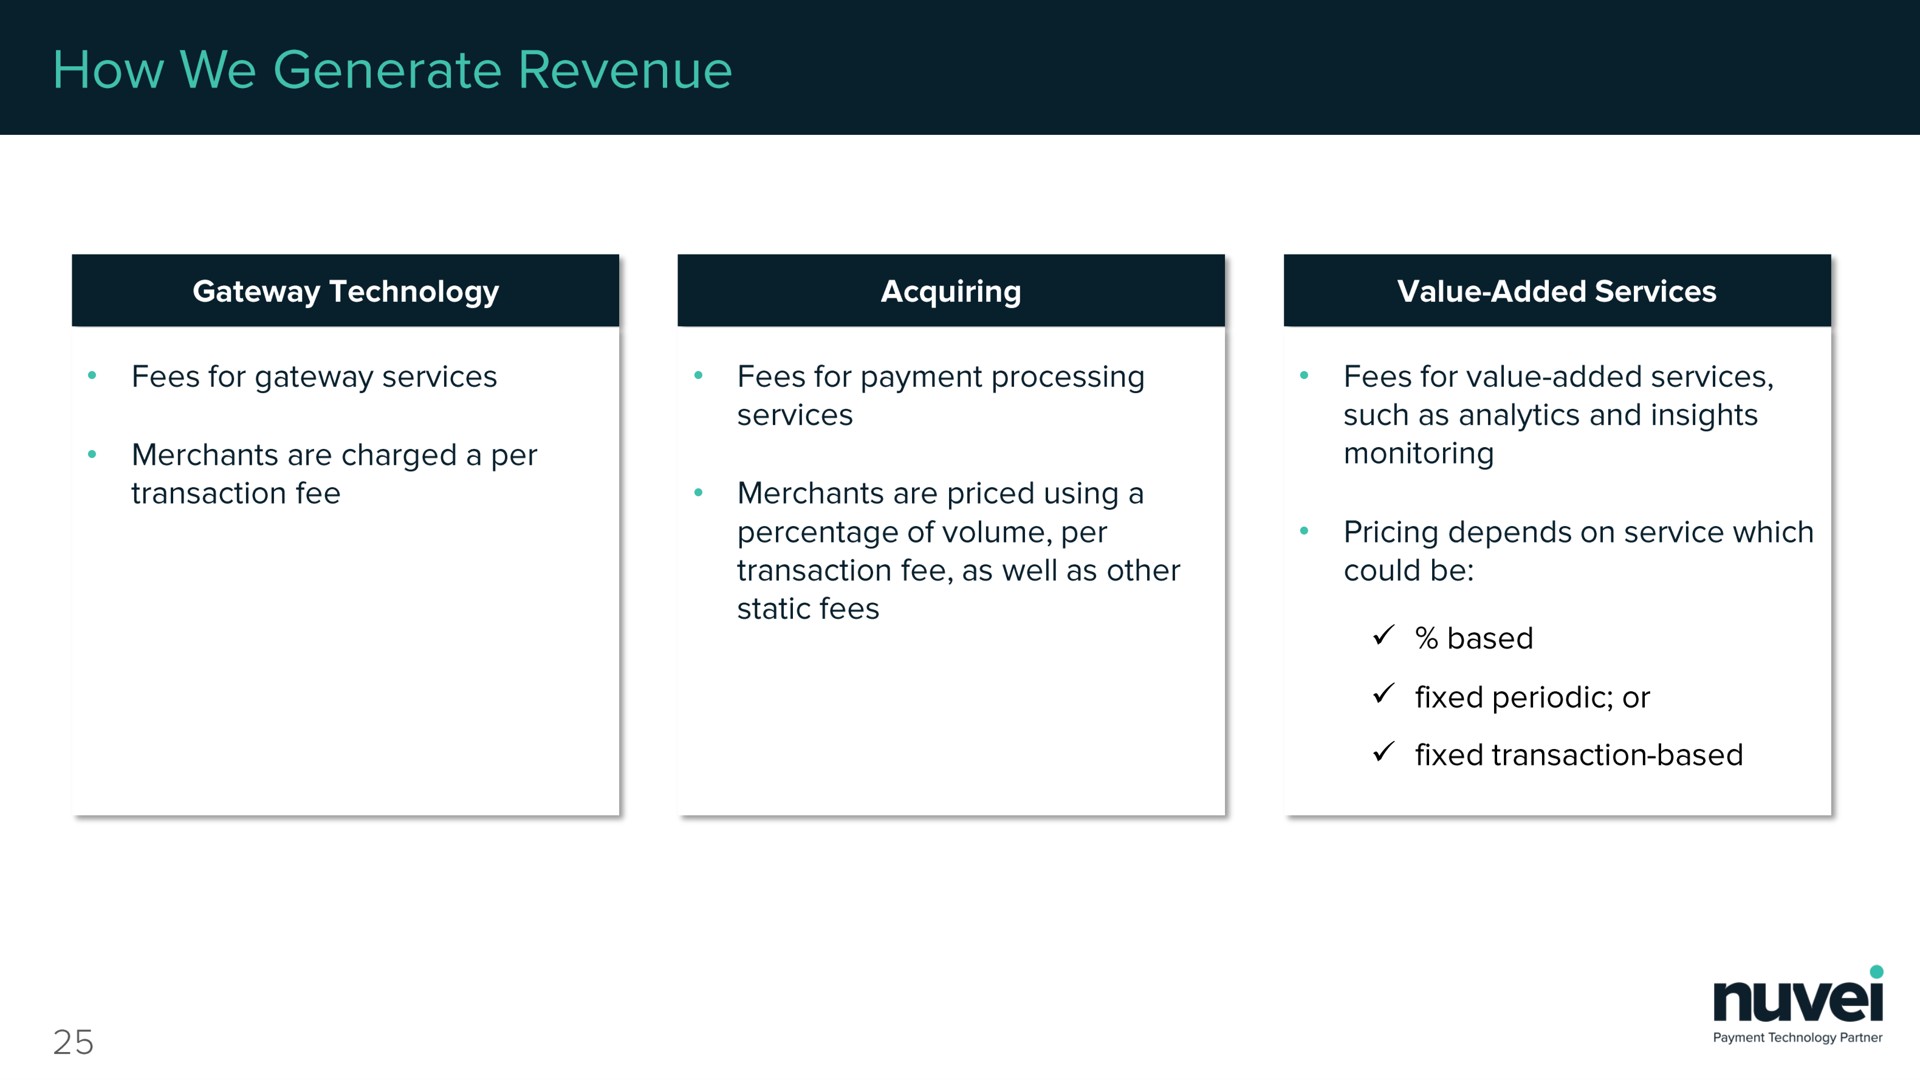 how we generate revenue based fixed periodic or | Nuvei